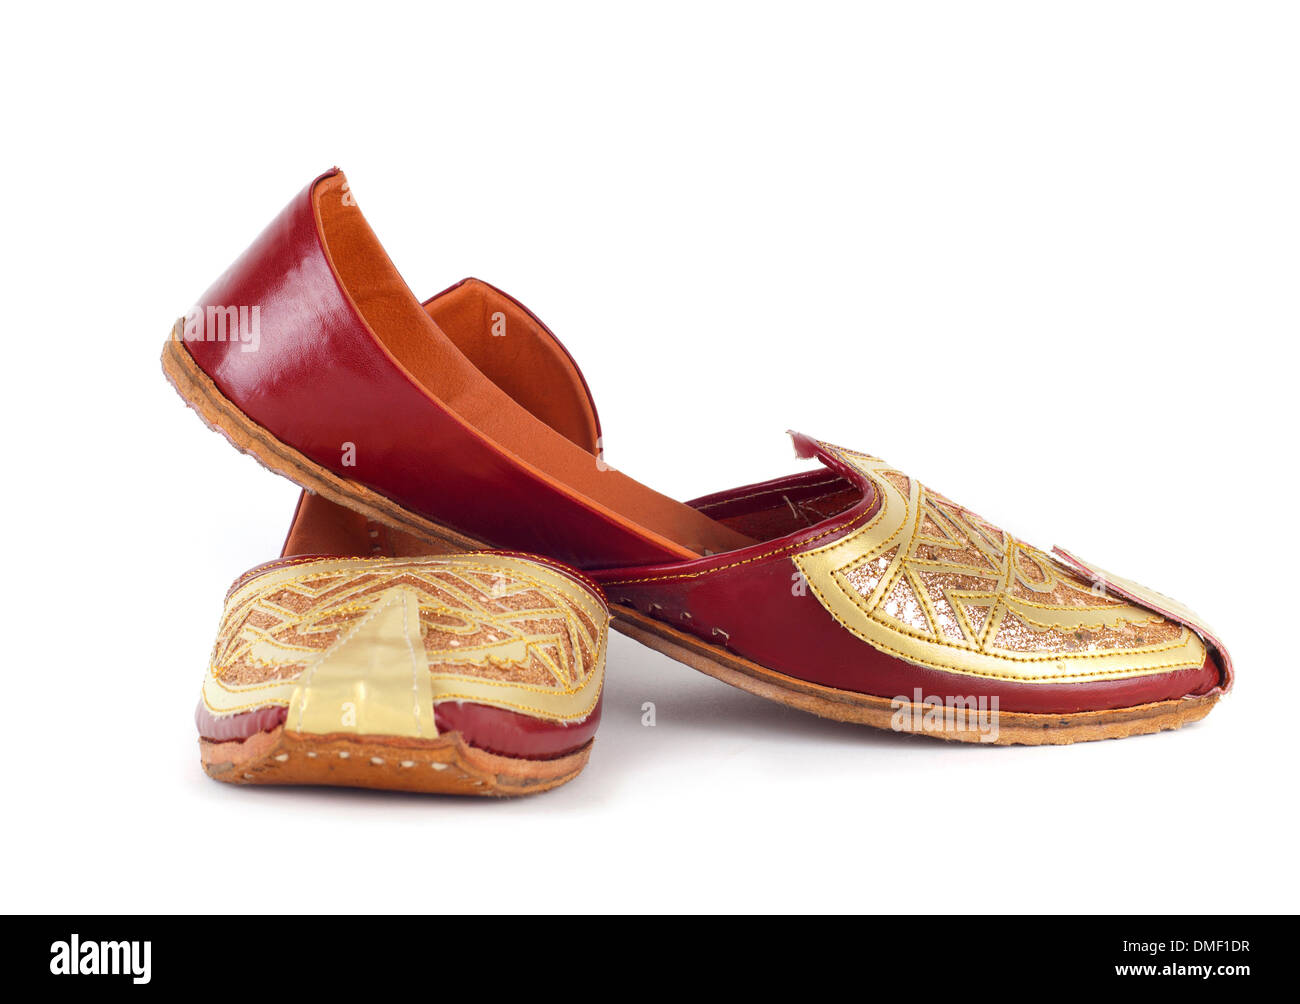 Pair of traditional Indian shoes on white background Stock Photo